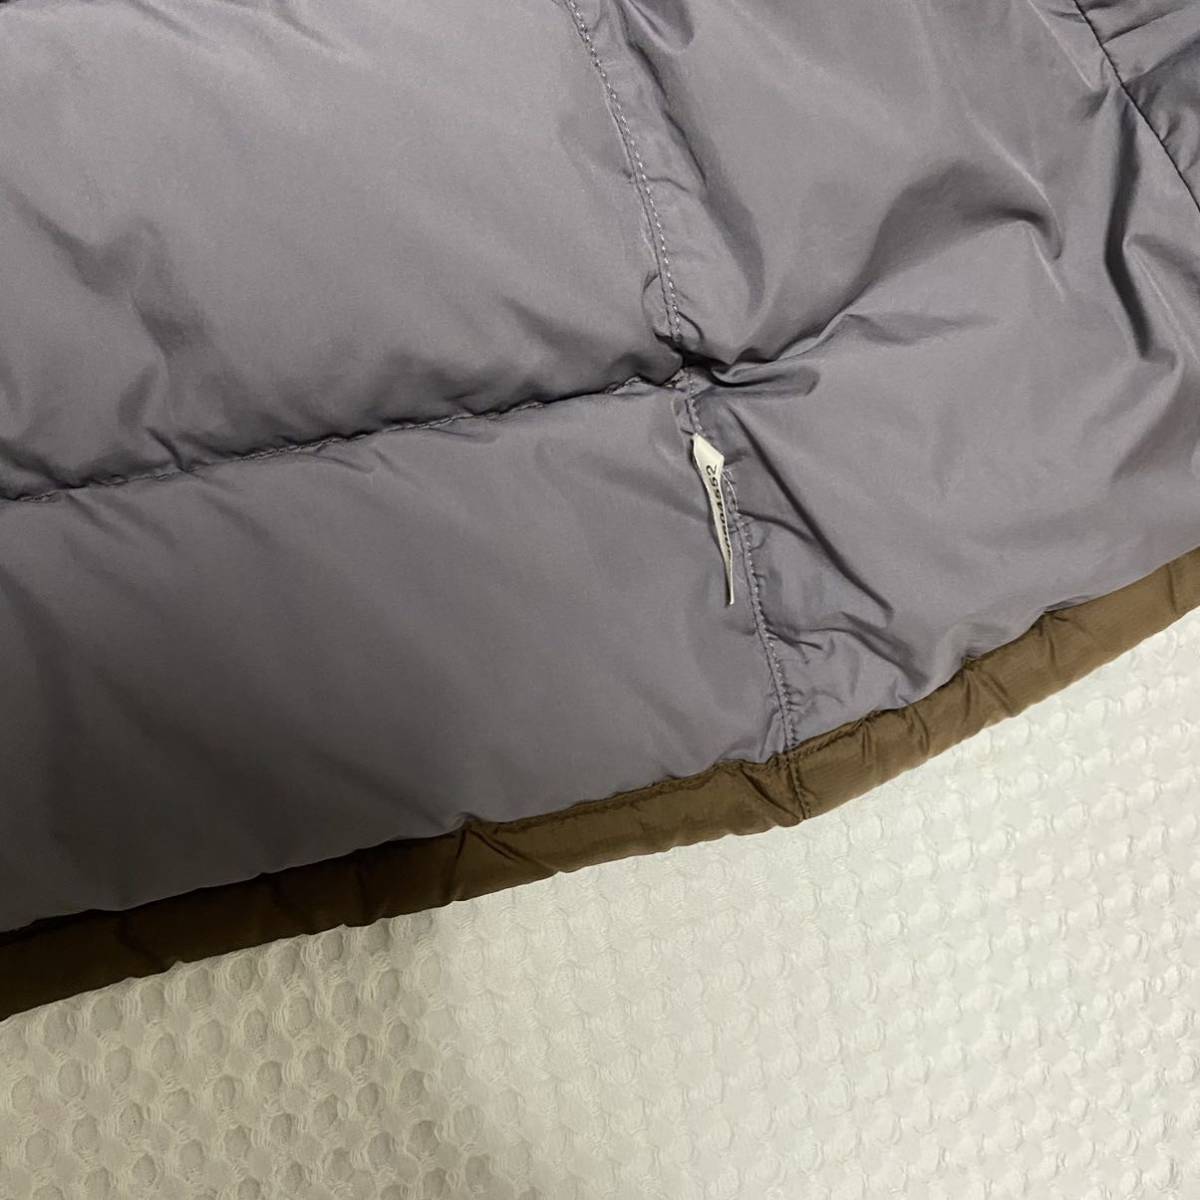  North Face down jacket lady's rare XS Brown 